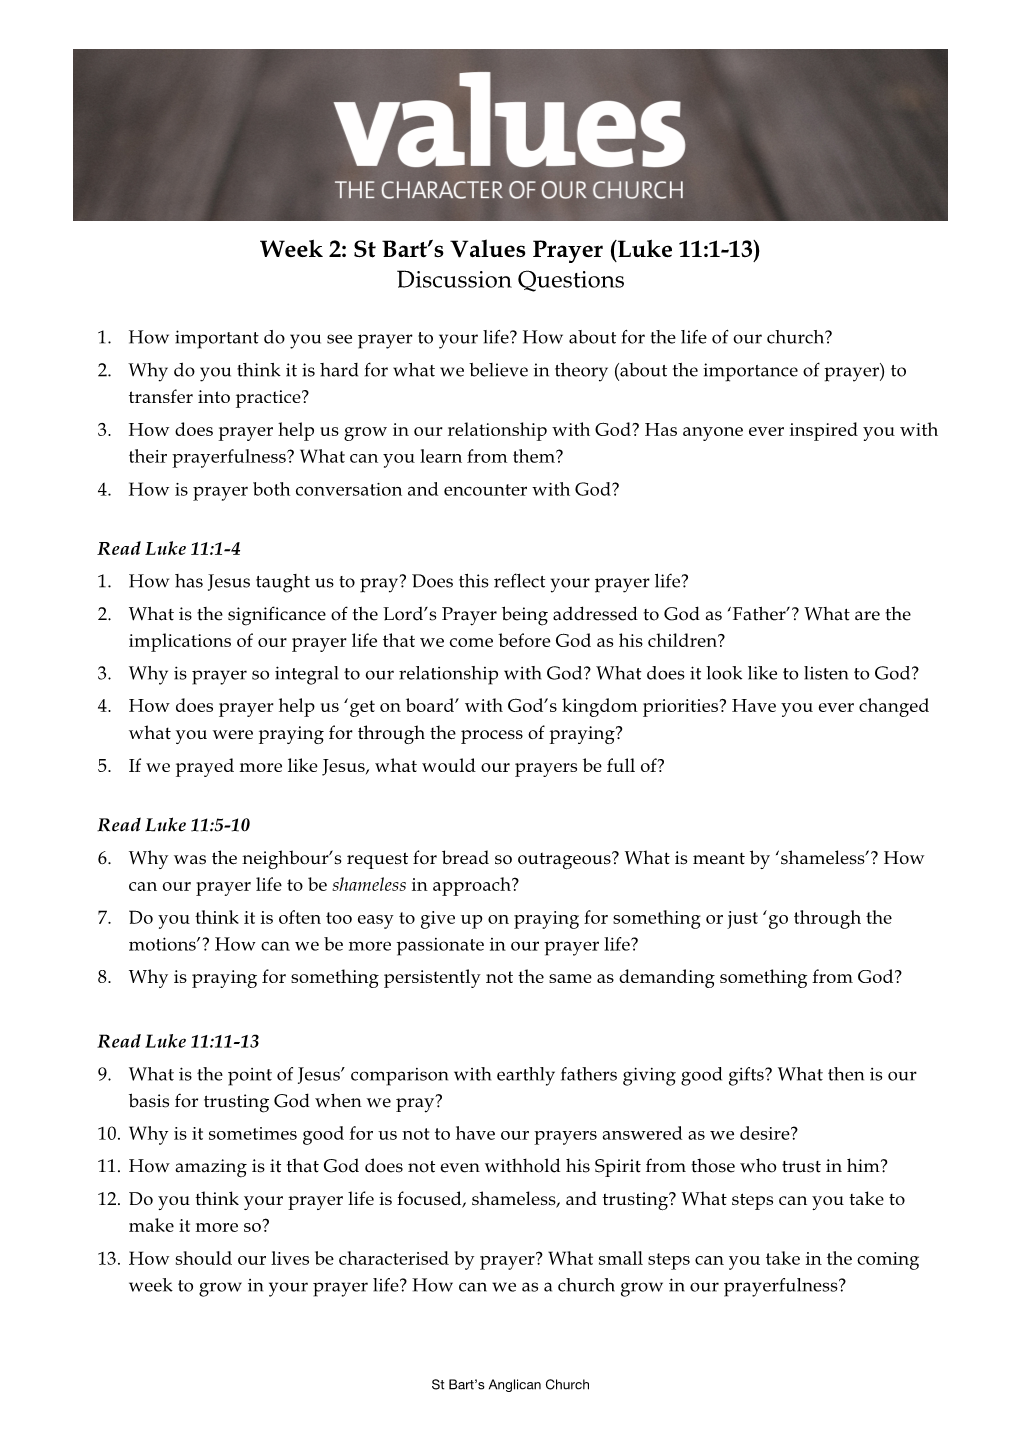 Week 2: St Bart's Values Prayer (Luke 11:1-13) Discussion Questions